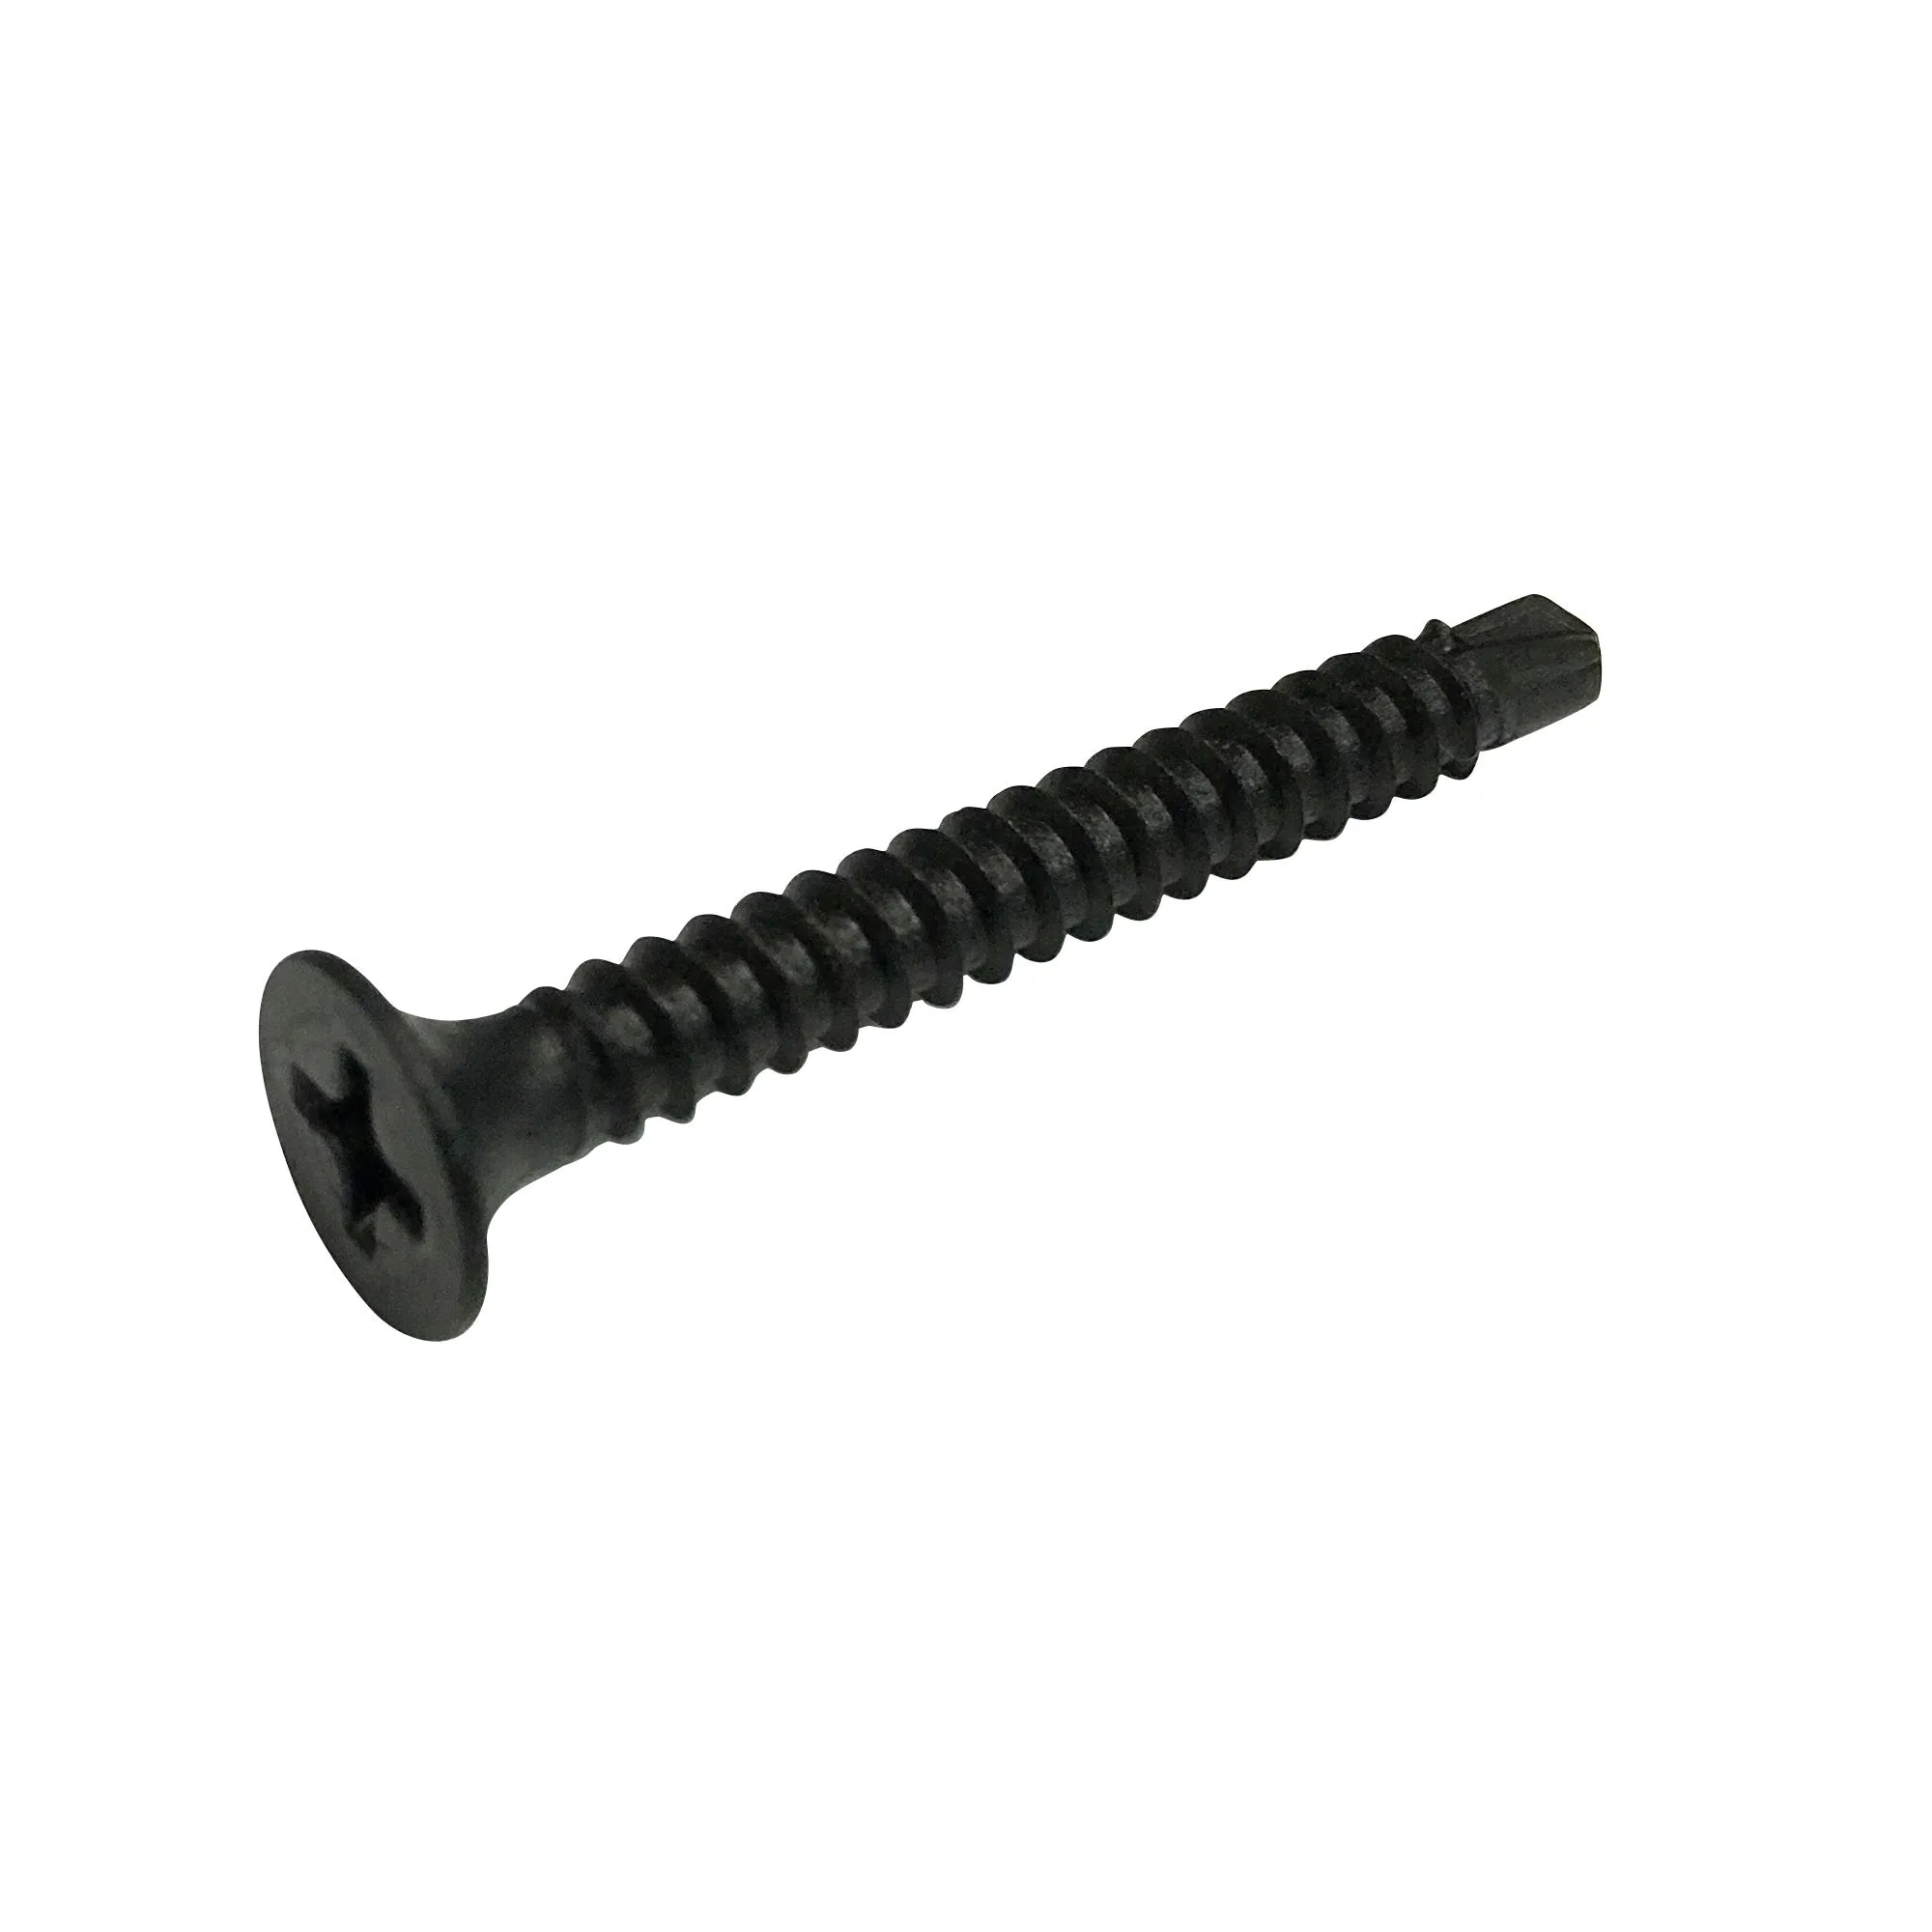 Diall Carbon steel Plasterboard screw (Dia)3.5mm (L)25mm, Pack of 200